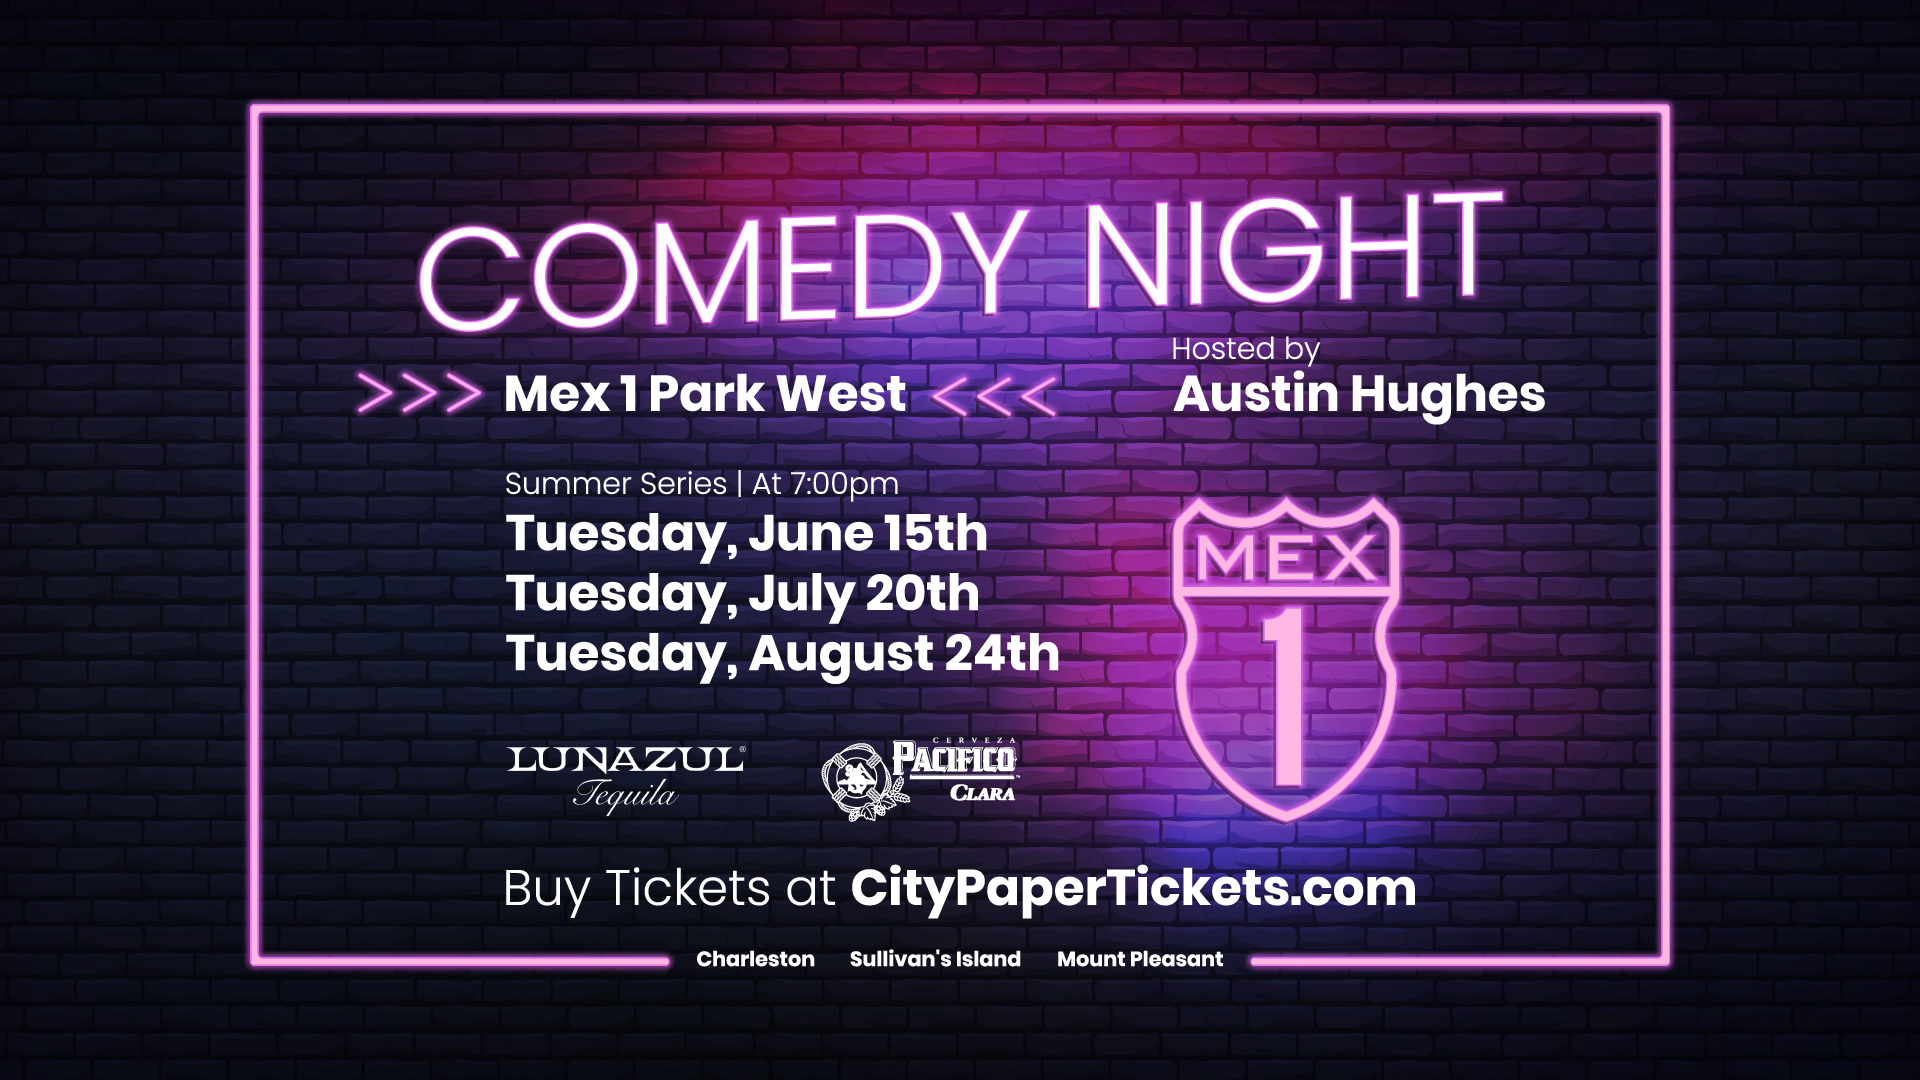 Comedy Night at Mex1 Park West